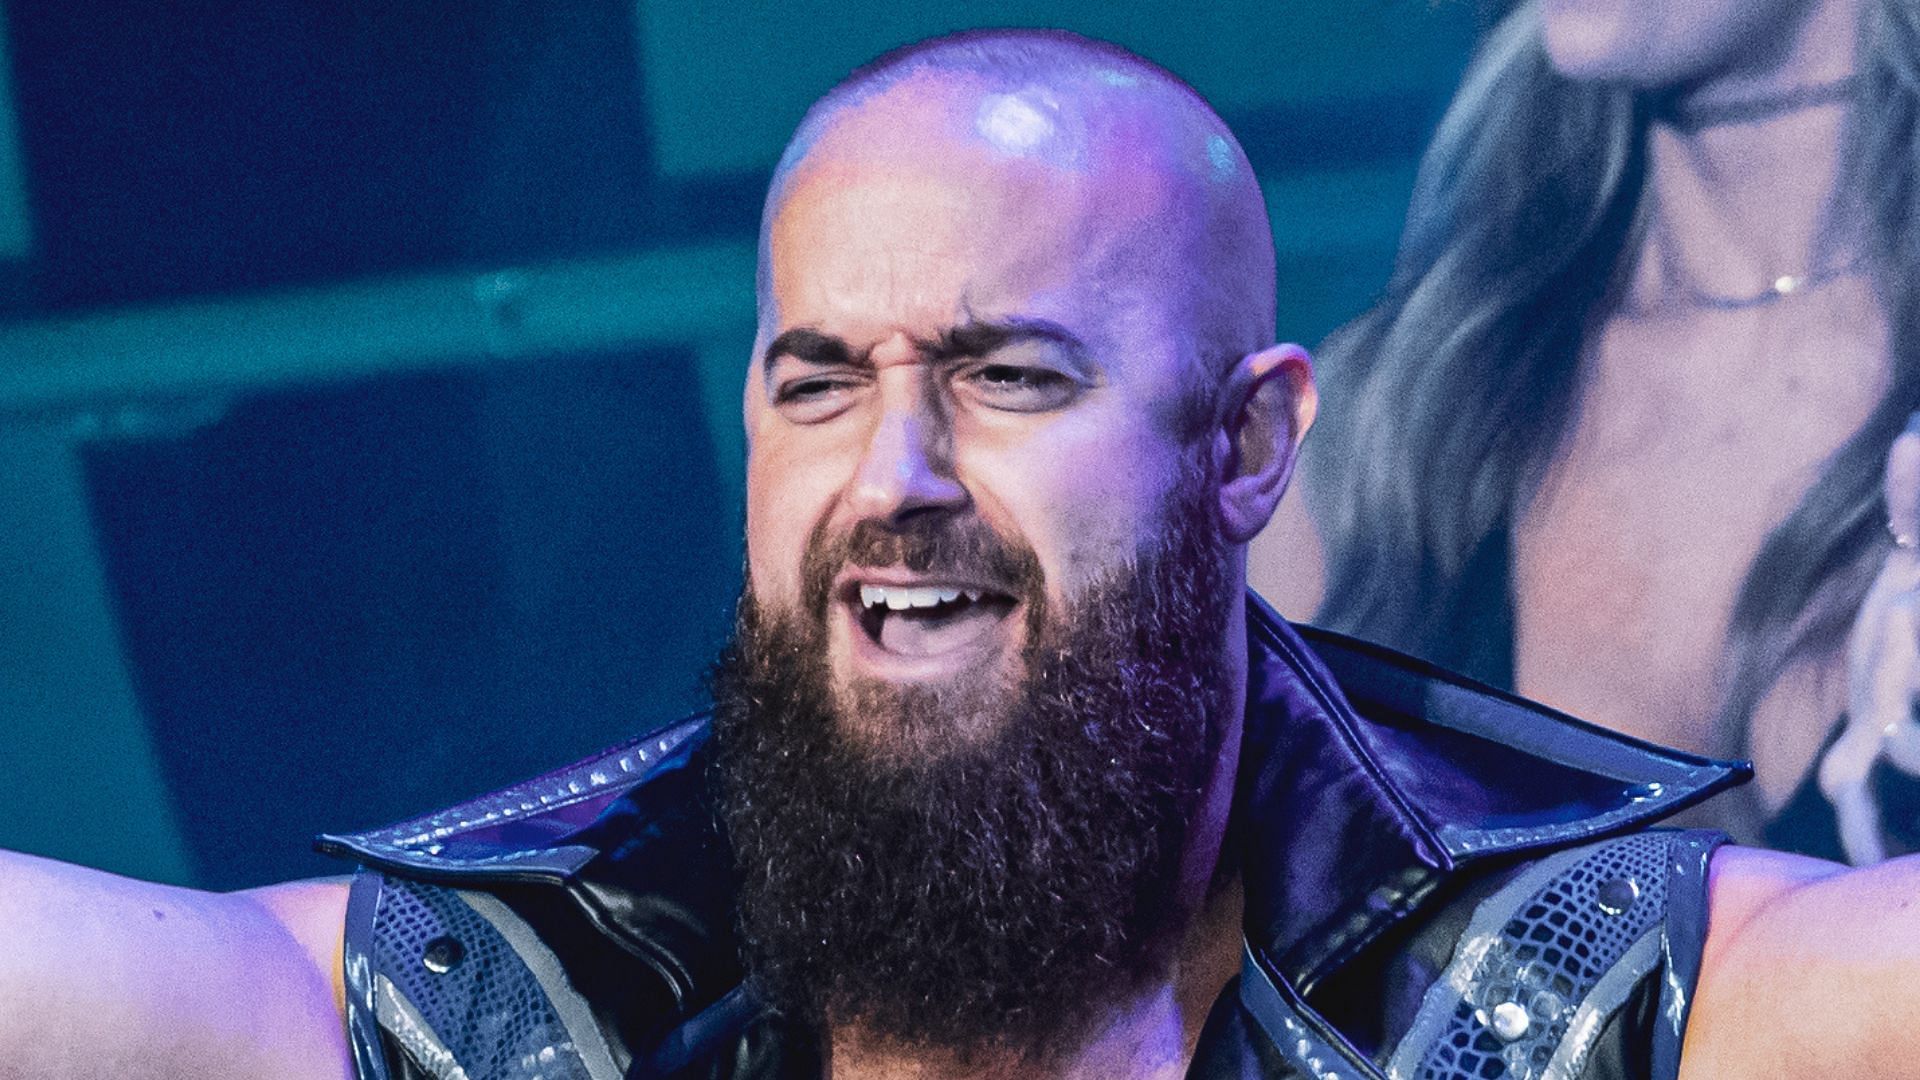 John Silver at an AEW event in 2022